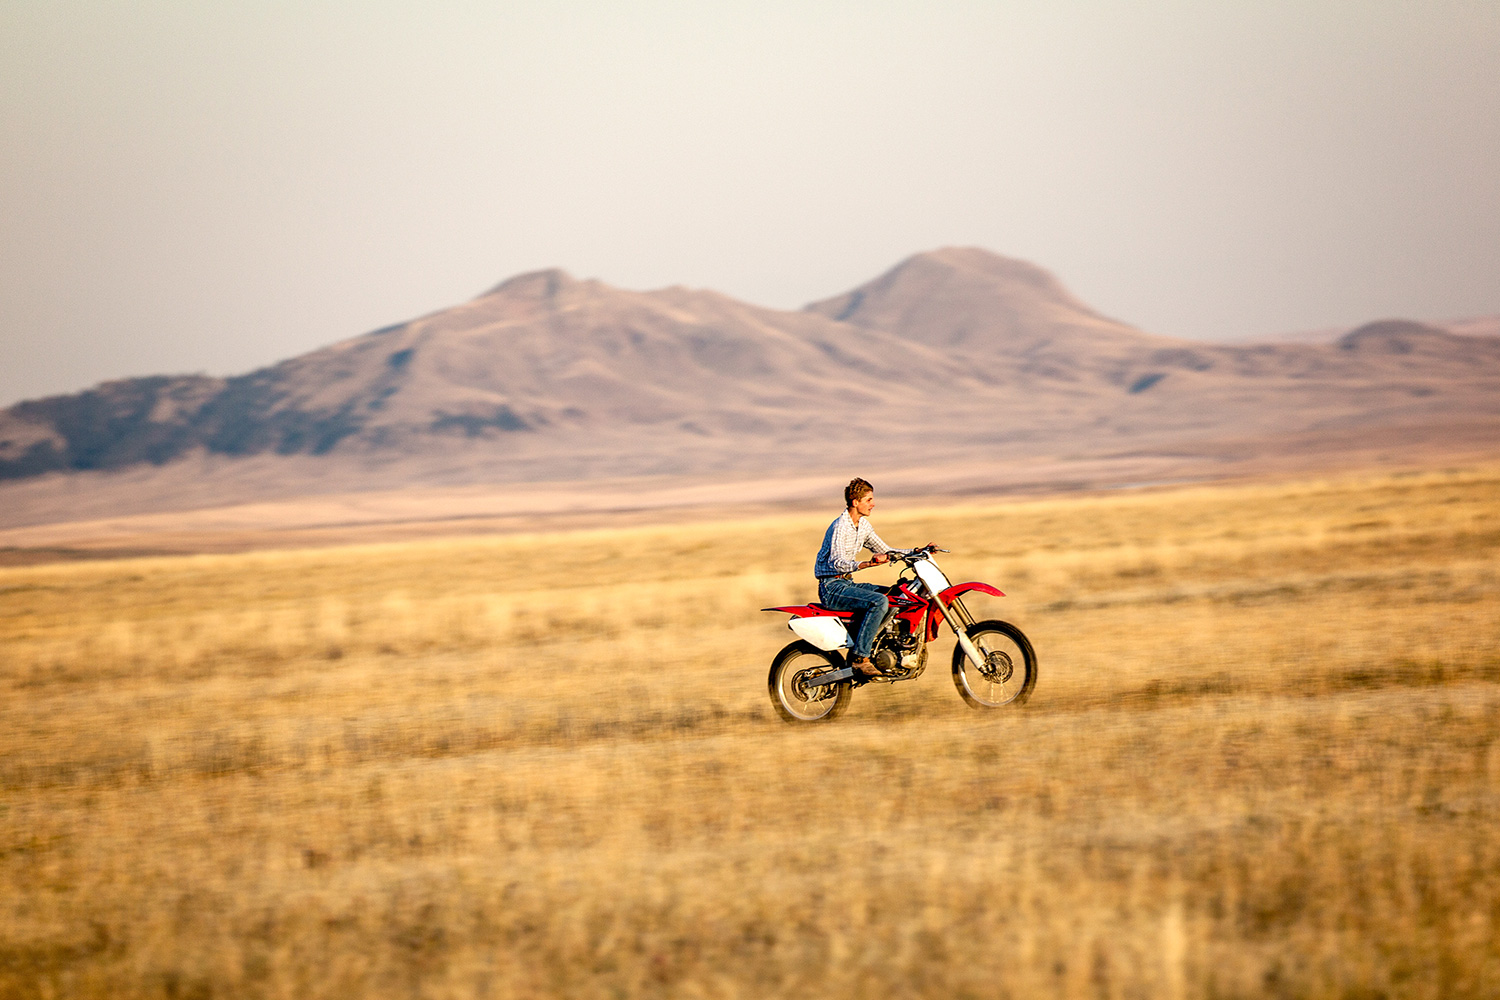 A teen riding his motorcycle fast across the open plains near Cleveland, Montana.&nbsp;→ License Photo